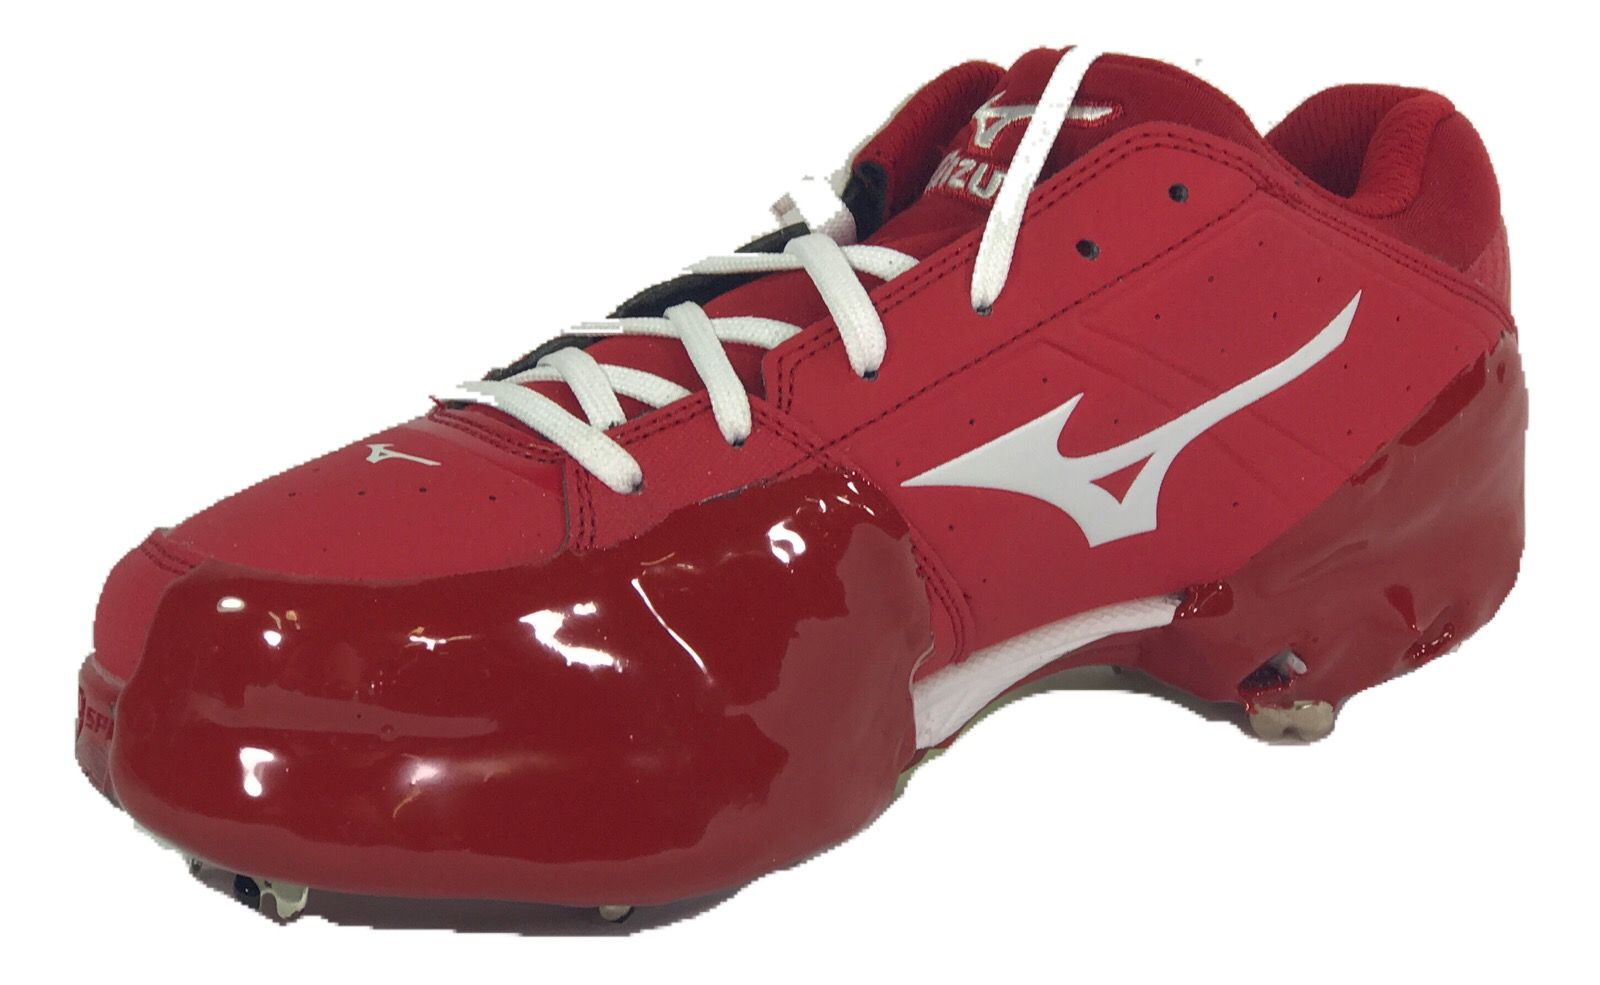 Tuff Toe shown applied to toe and heel of red Mizuno cleats to protect and triple lifespan.